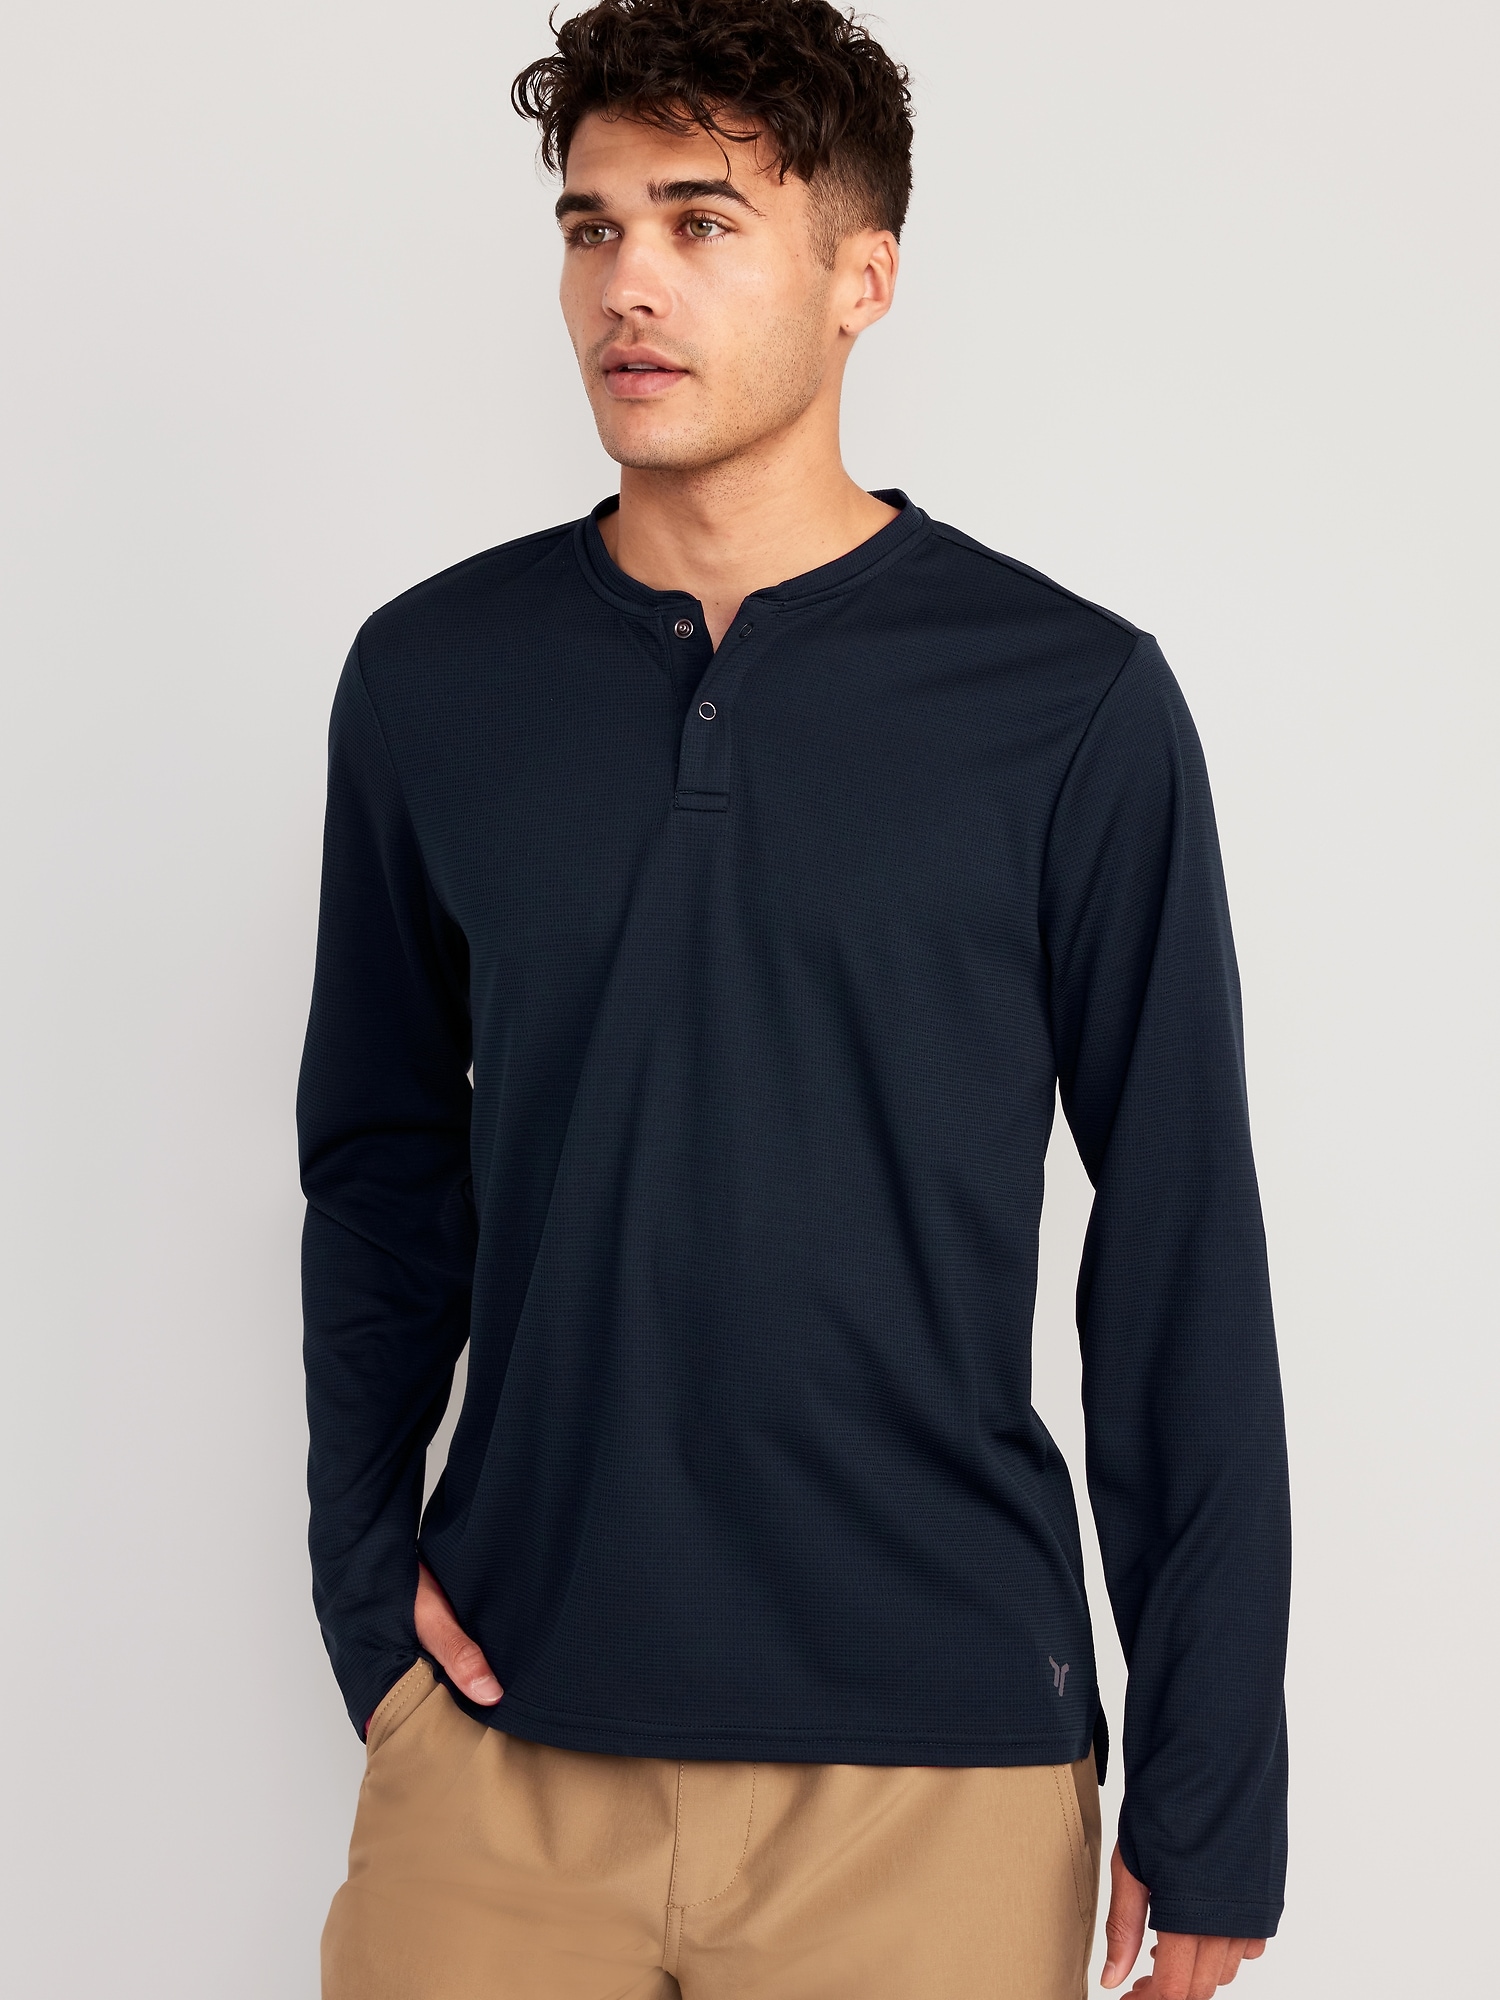 Long-Sleeve Thermal-Knit Performance Men | Old Navy